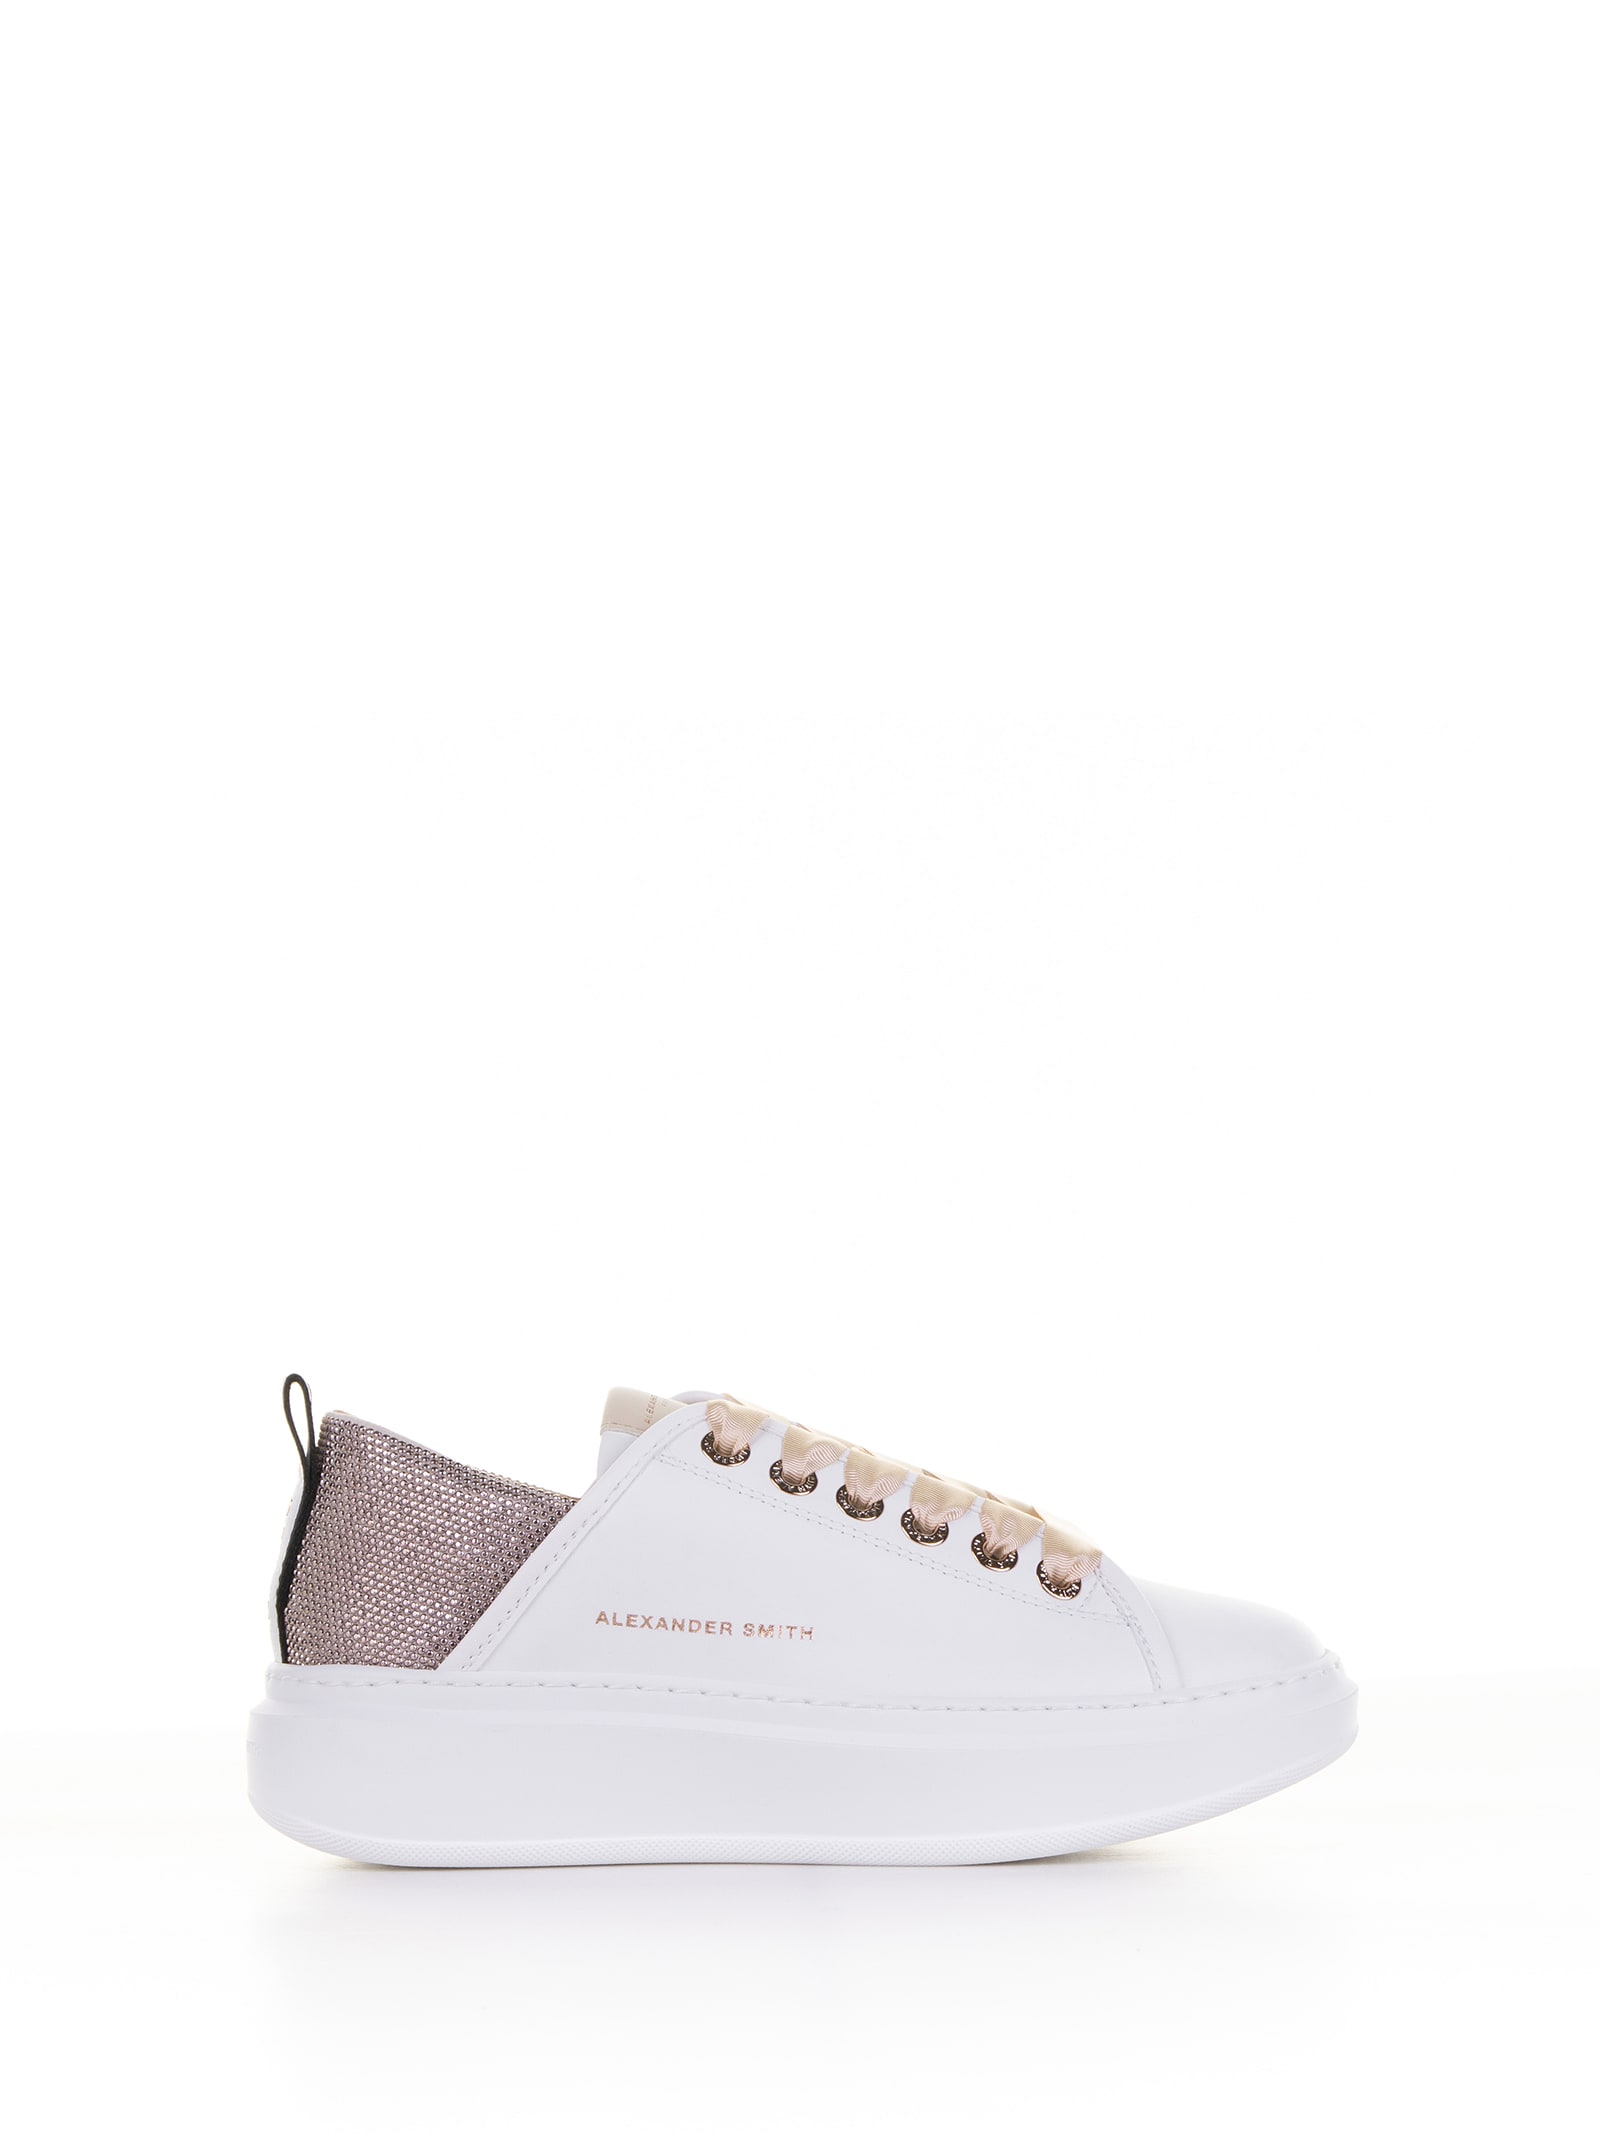 Alexander Smith Wembley Sneaker In Leather And Rhinestones In White Beige